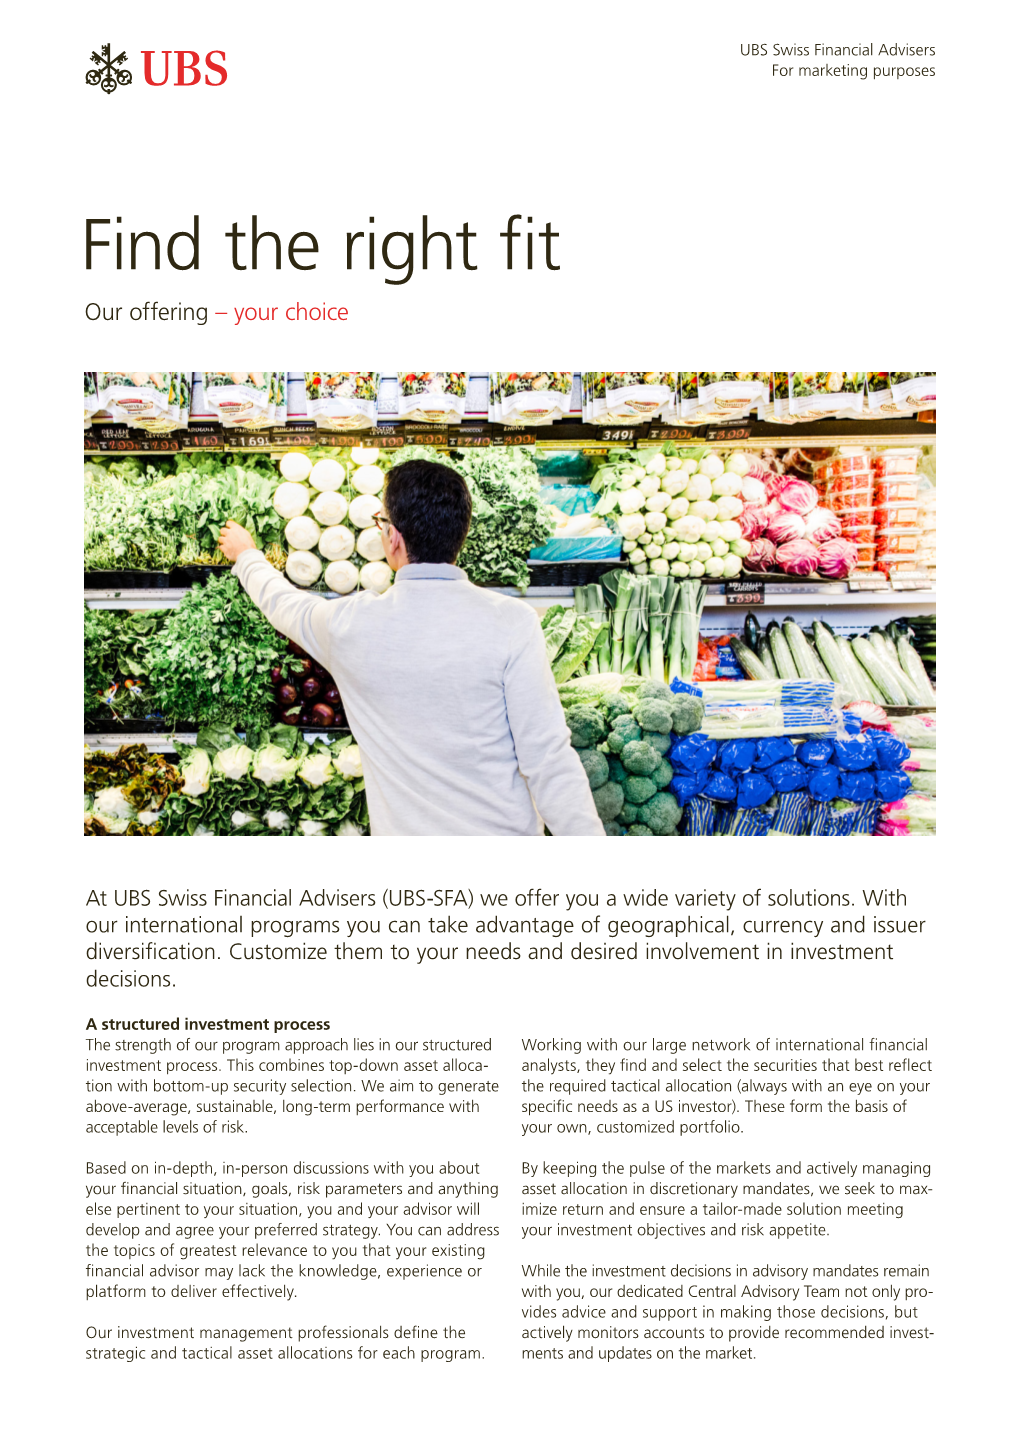 Factsheet-Find-The-Right-Fit-Offering.Pdf